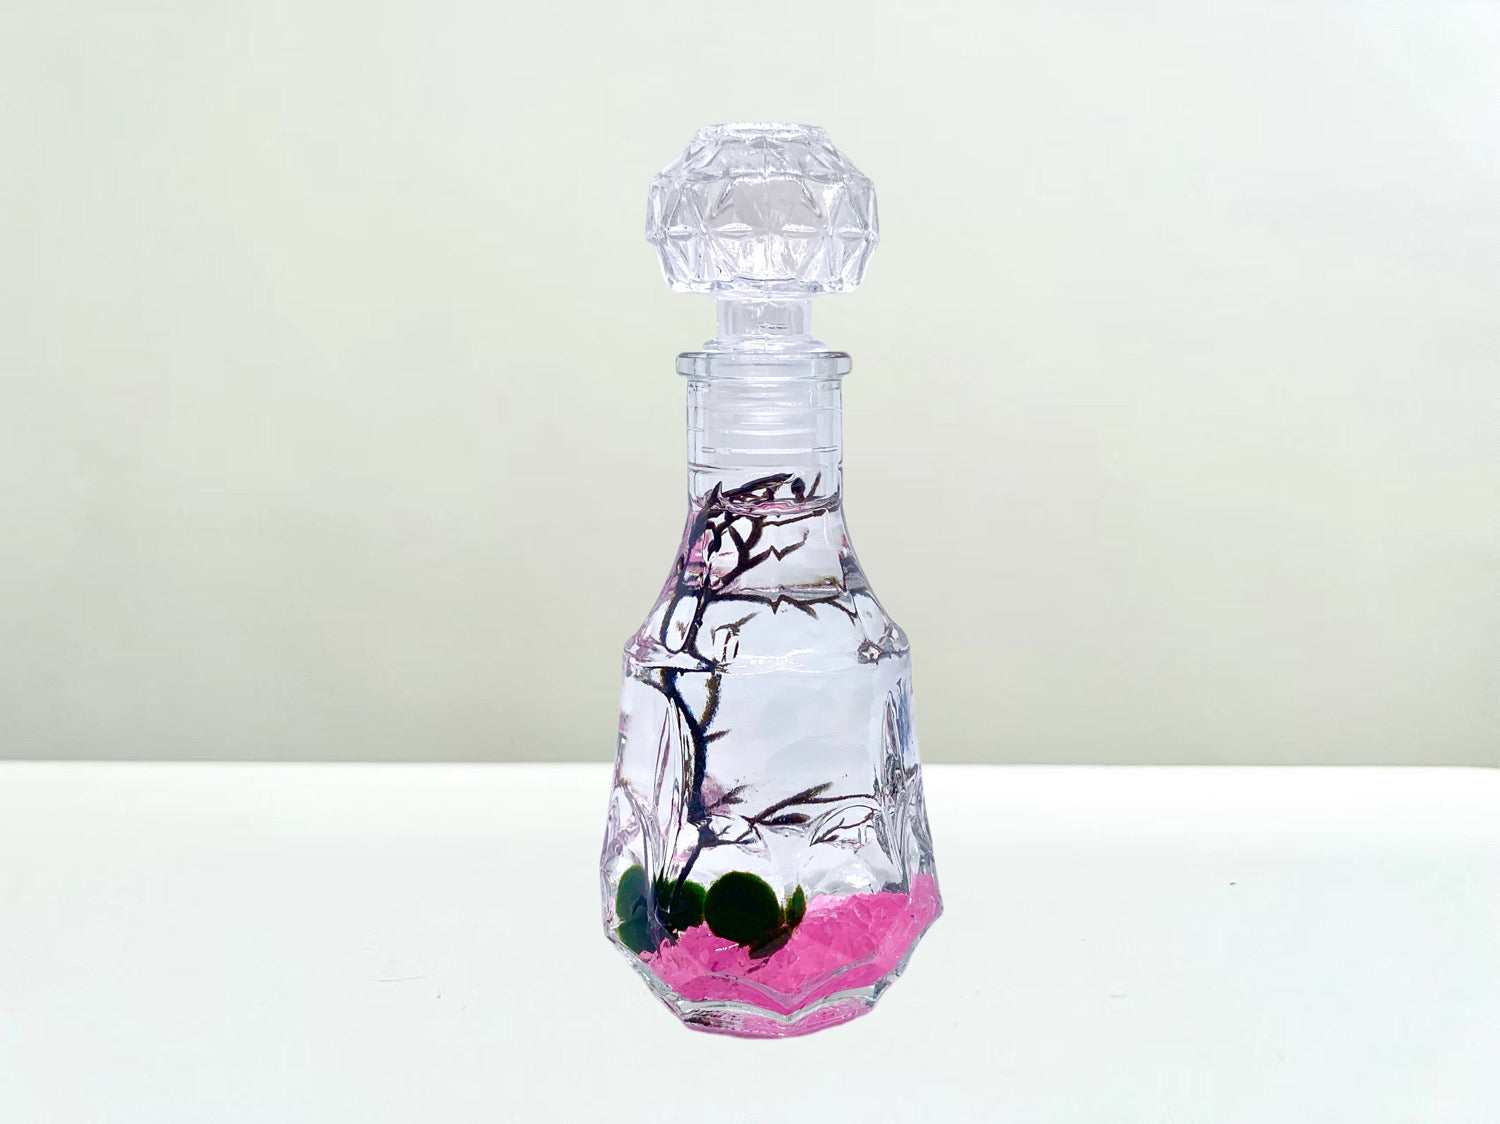 Romantic Marimo Moss Balls Glass Bottle Aquarium With Lid Love Plants for Beginners for Couples - Moss Artistry